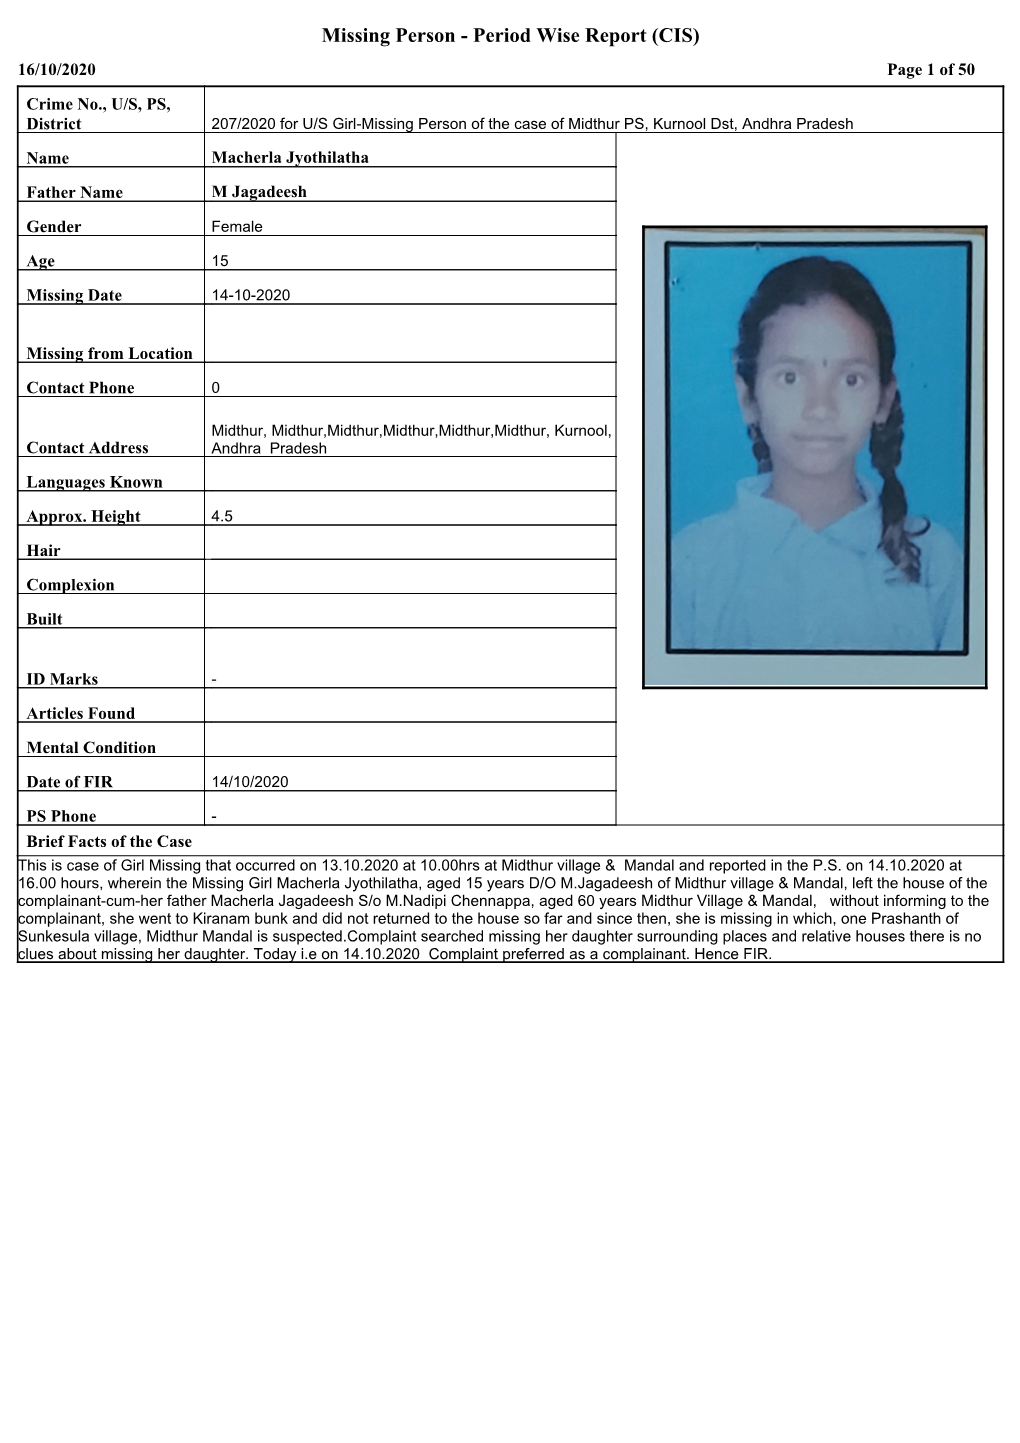 Missing Person - Period Wise Report (CIS) 16/10/2020 Page 1 of 50